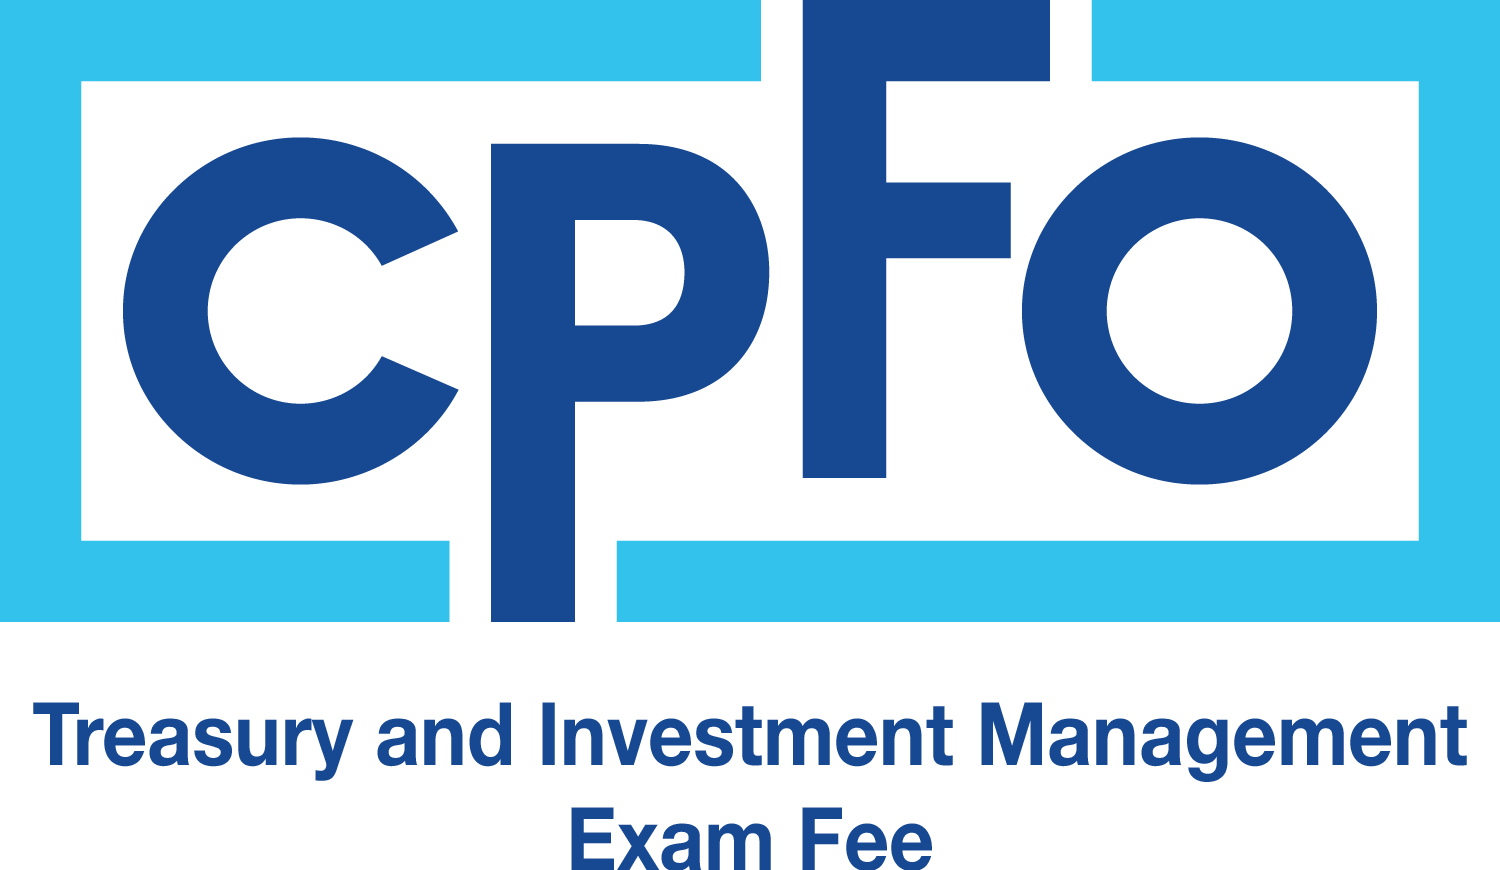 CPFO Exam Fee - Treasury and Investment Management